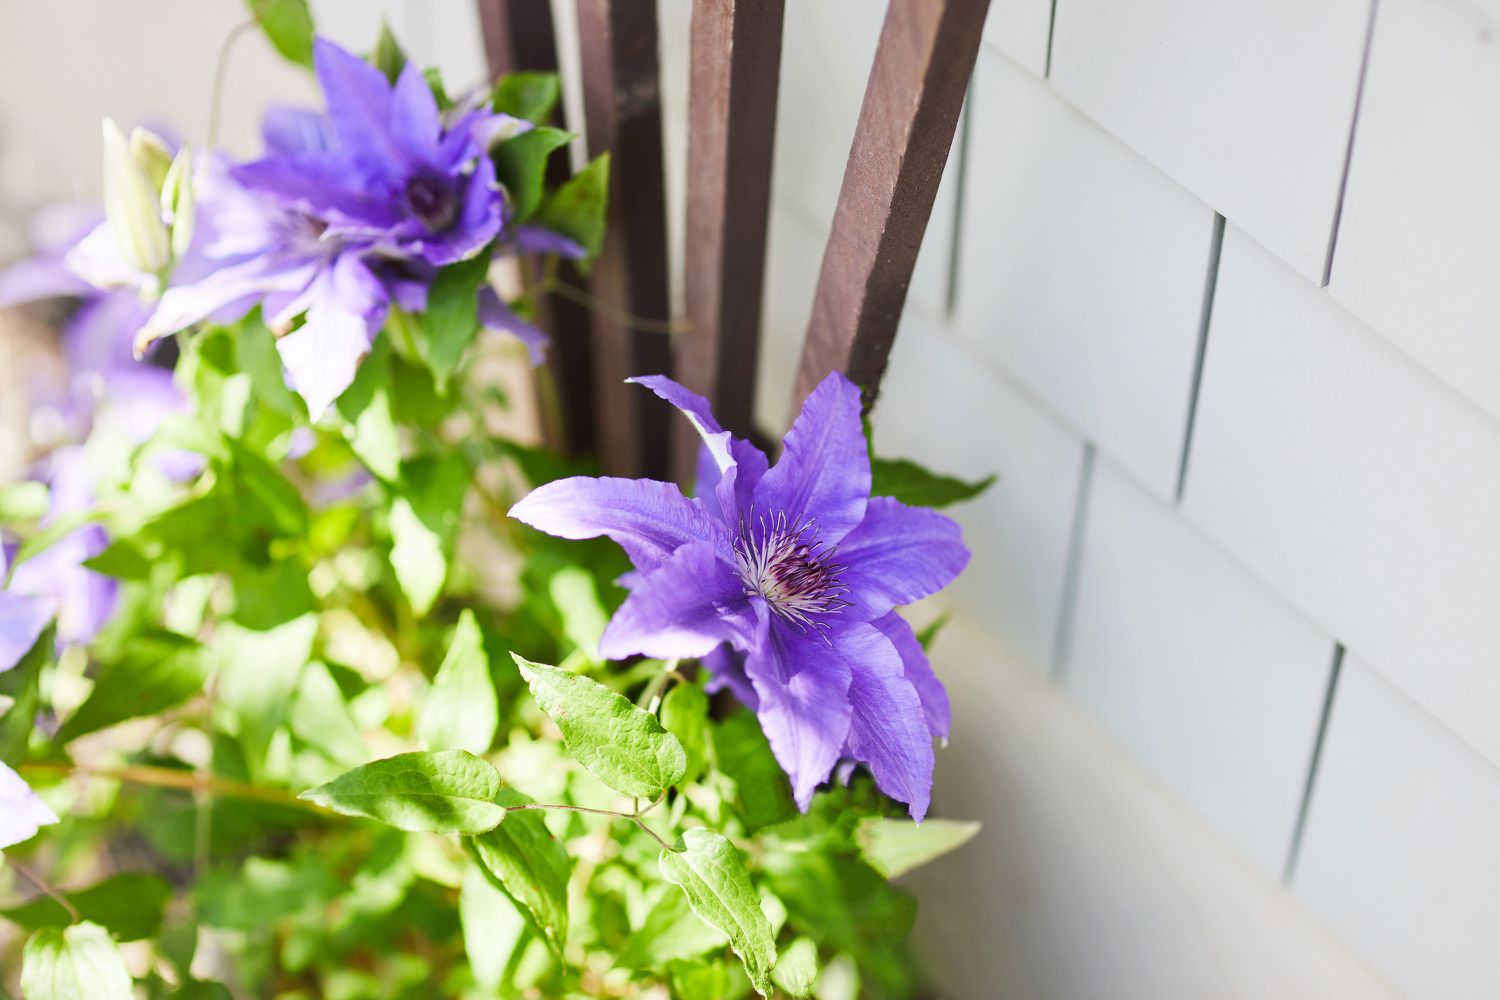 Clematis vine with light purple flowers climbing wooden trellis along white wall